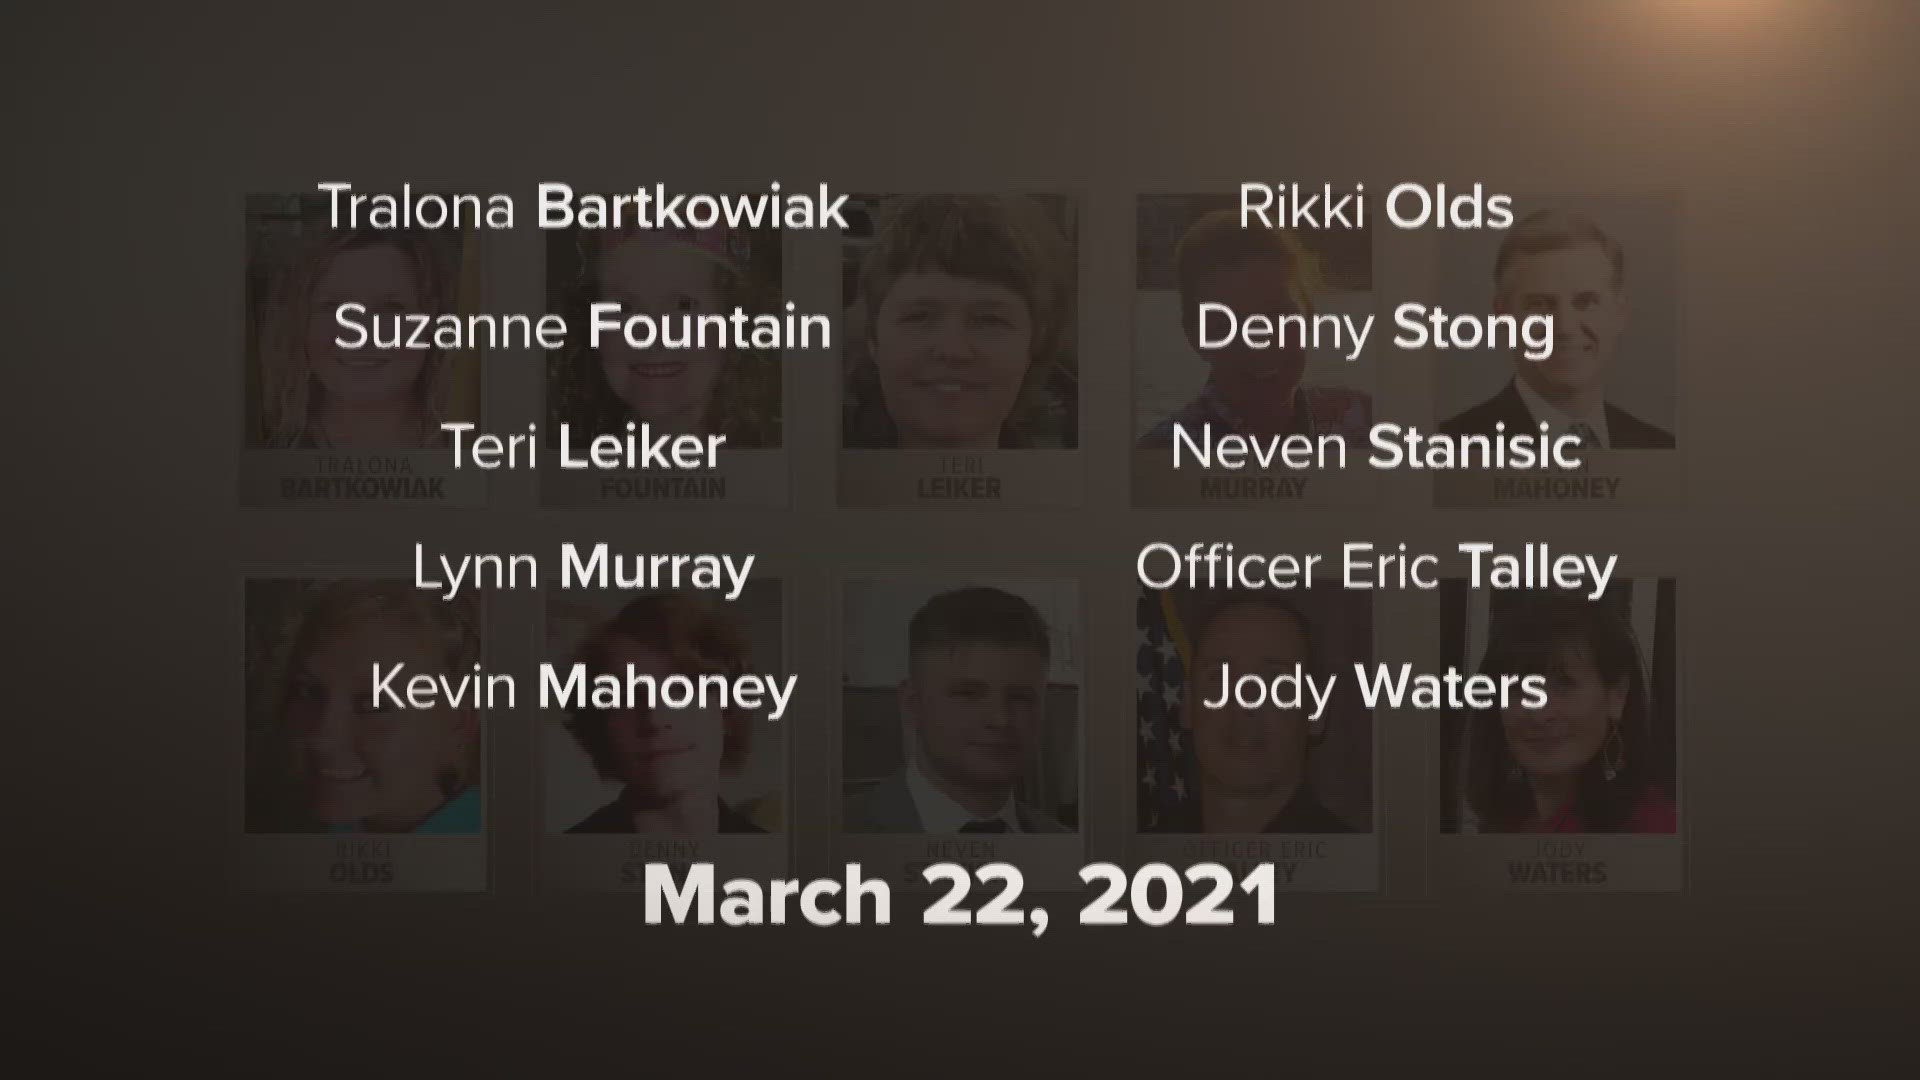 Wednesday marks two years since 10 lives were lost inside a Boulder King Soopers. The community will come together later tonight to honor the victims.